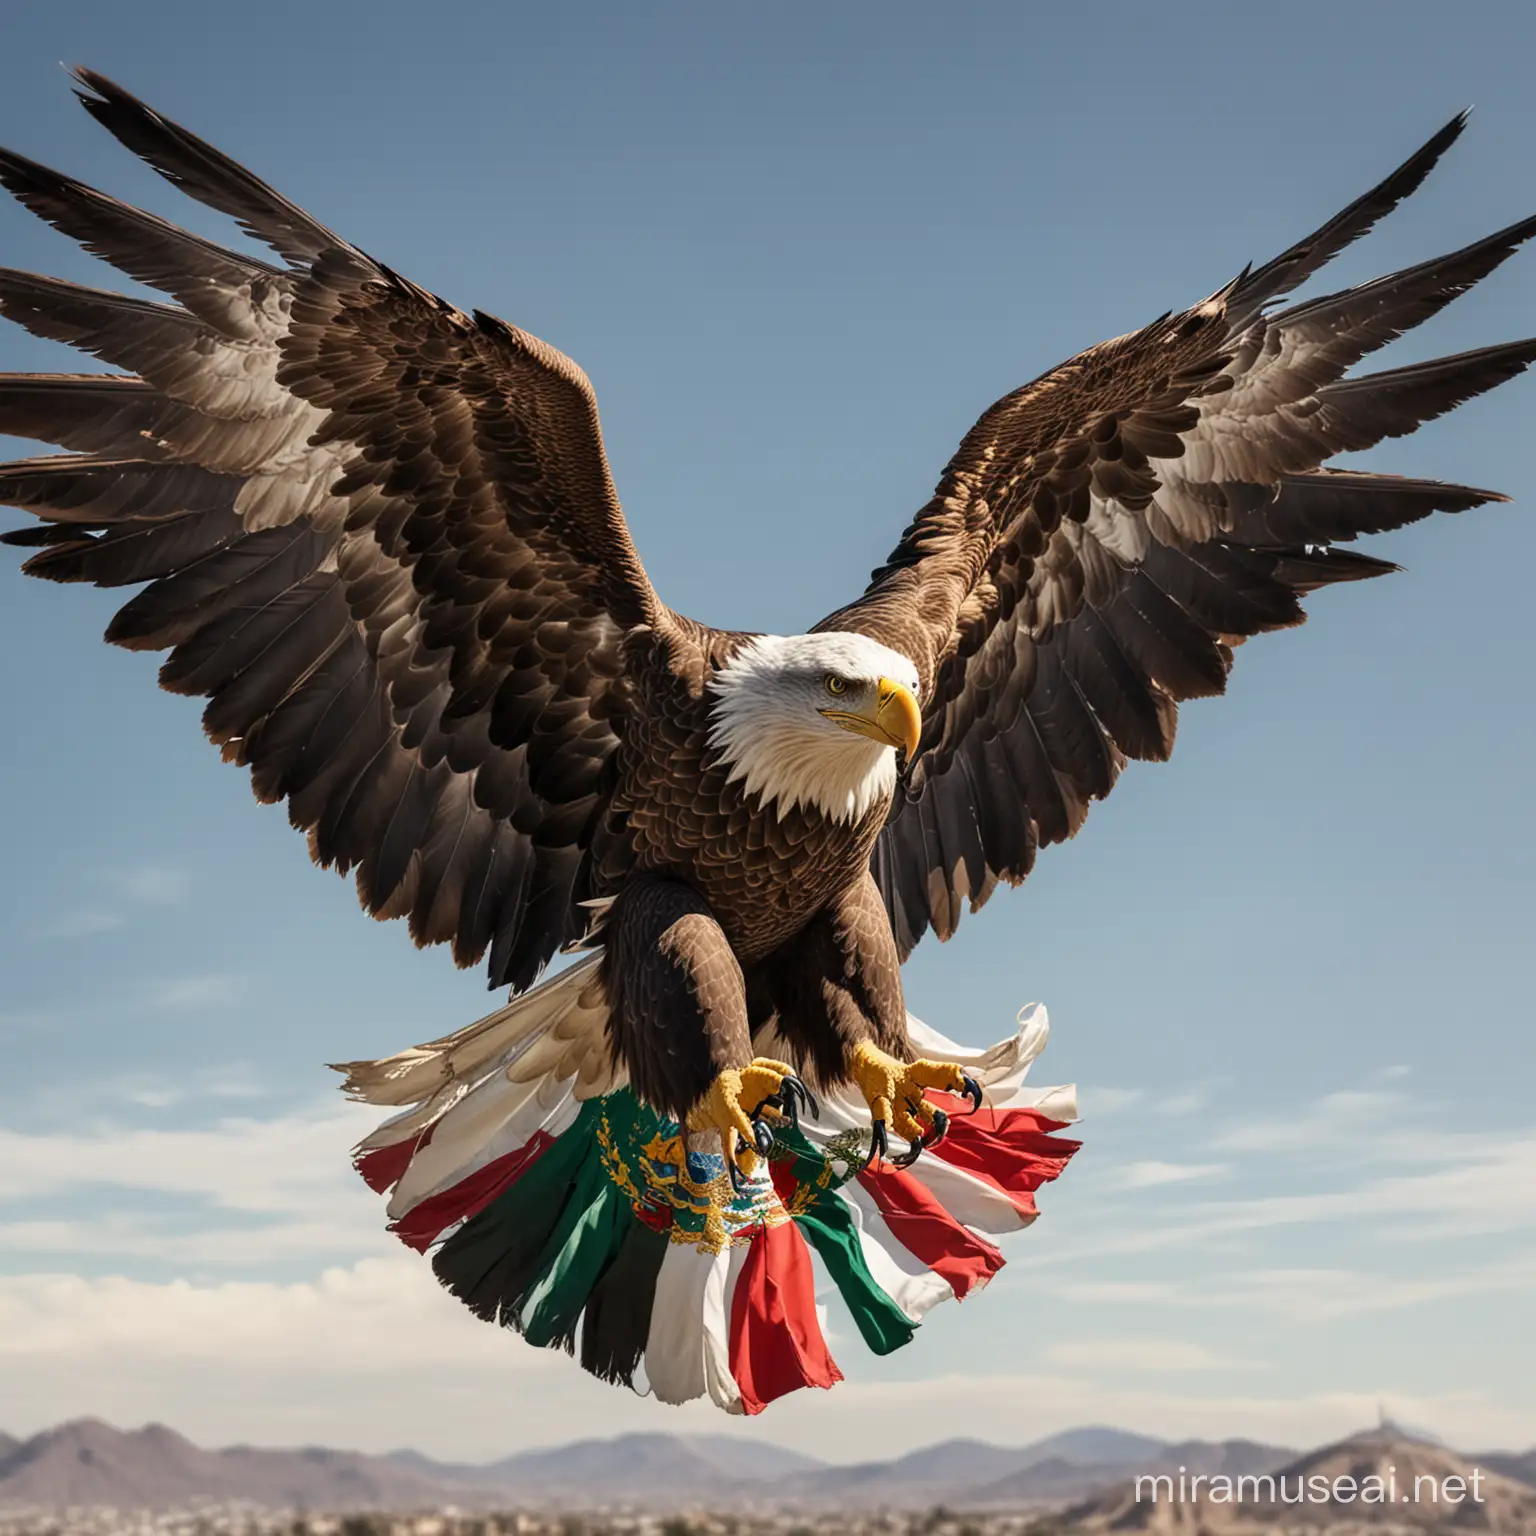 Majestic Eagle Soaring Over Mexico with National Flag